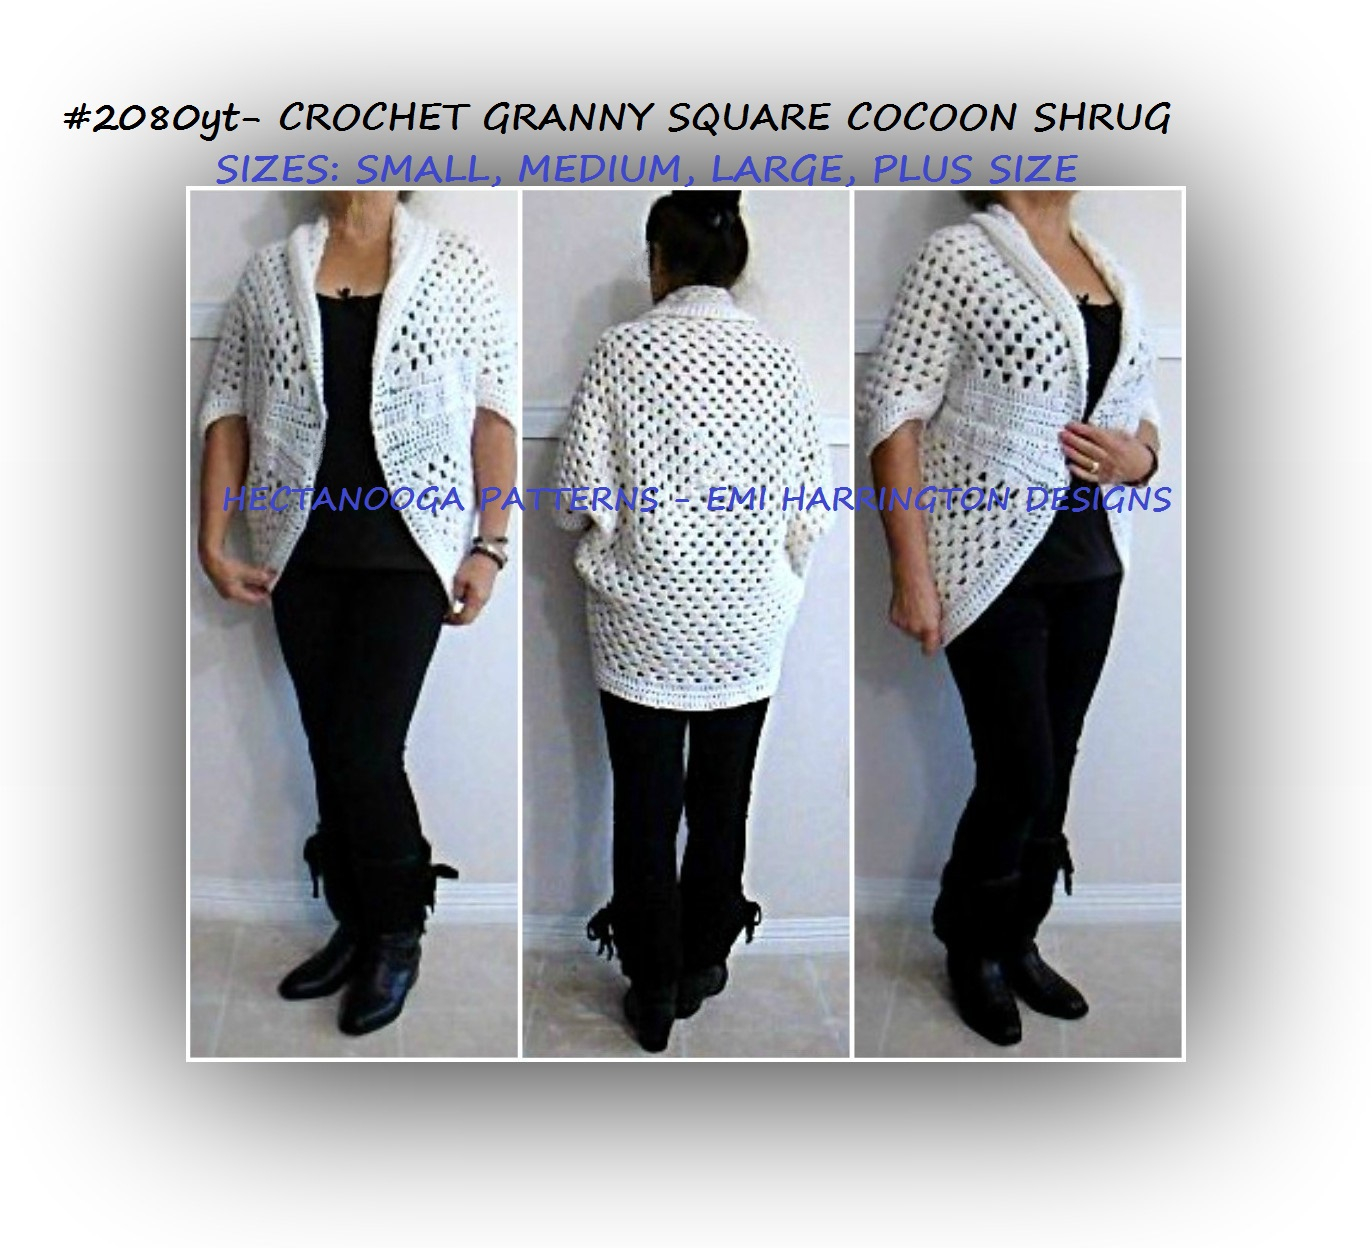 Free Crochet Shrug Patterns Hectanooga Patterns Free Crochet Pattern Granny Square Outdoor